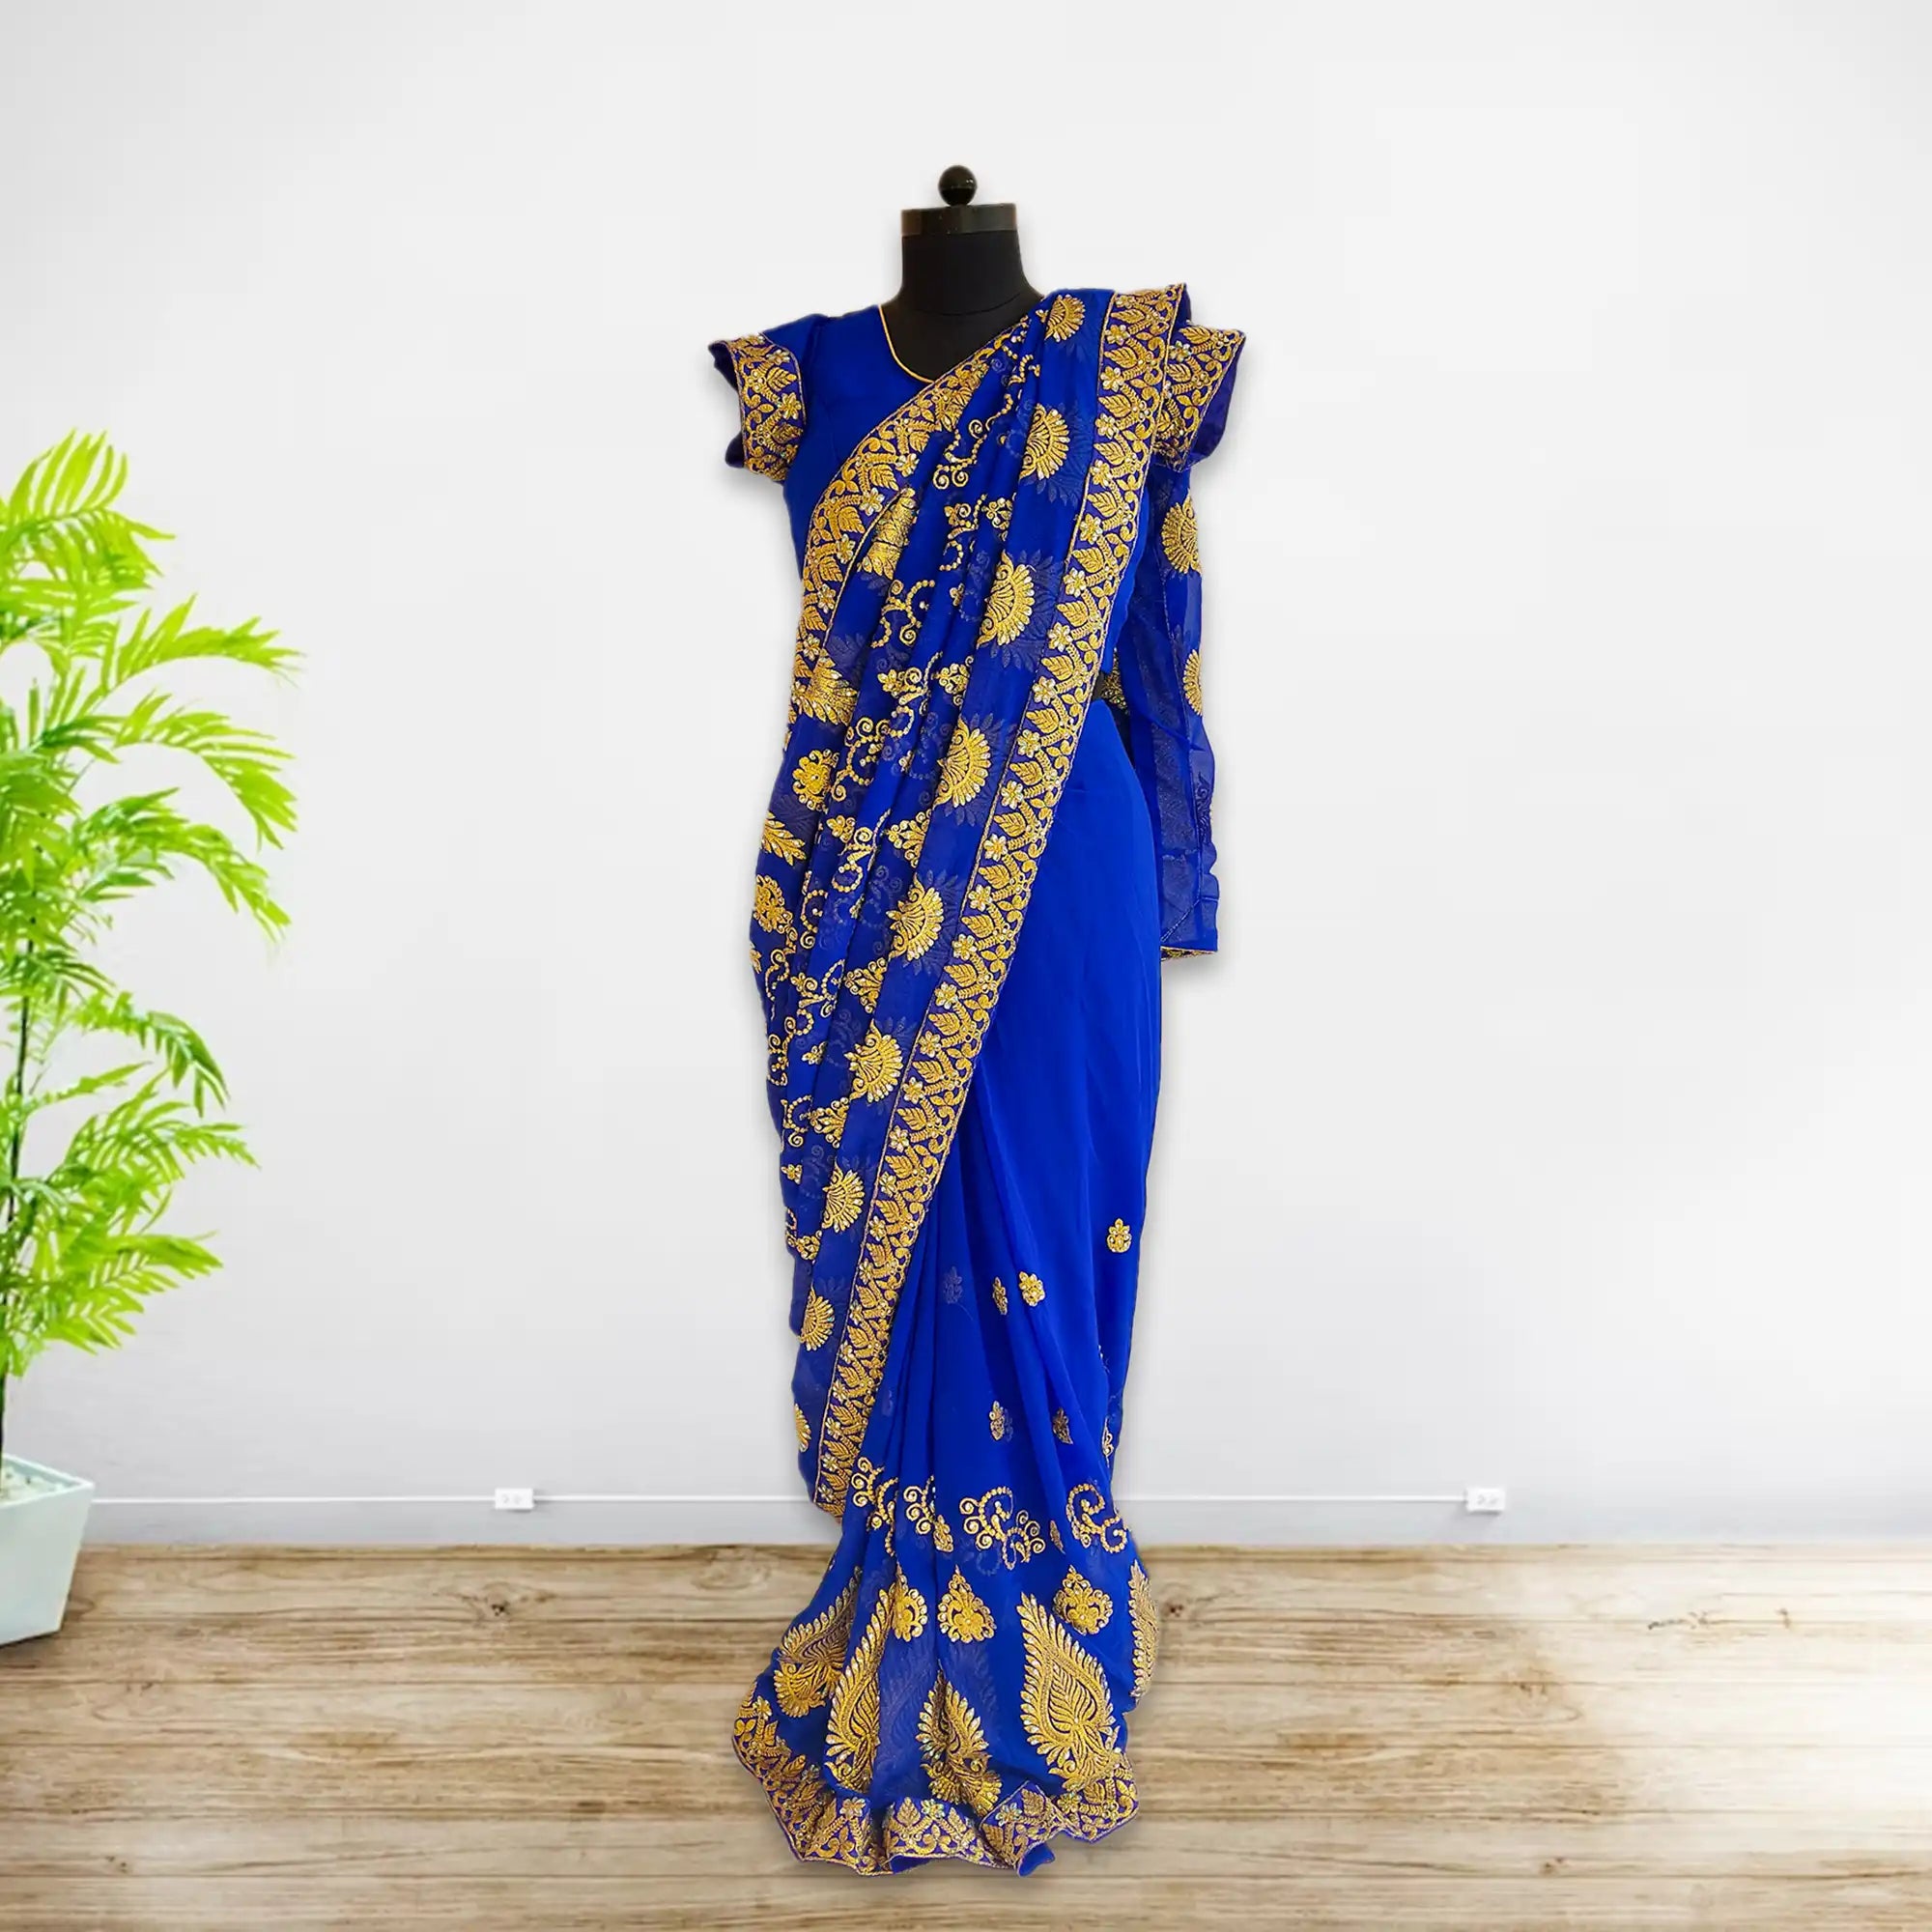 Blue Embroidery Saree Blouse for Wedding S 02